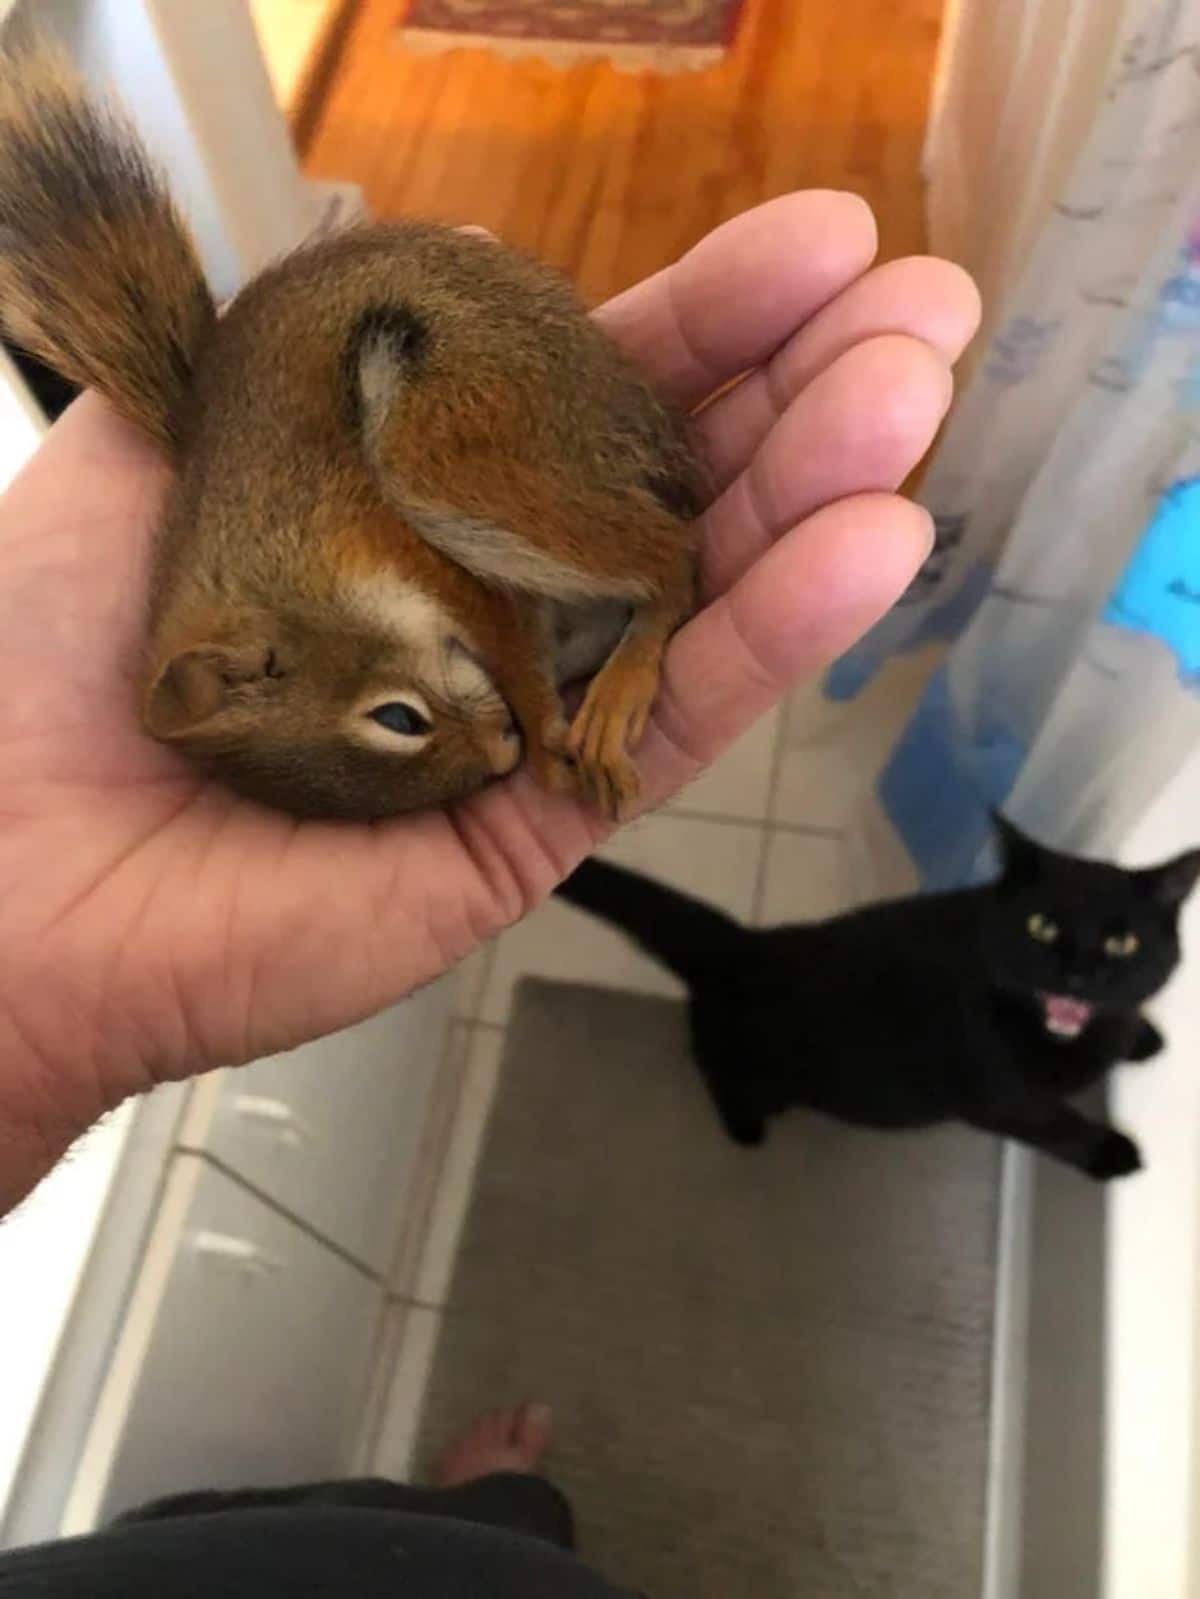 black cat hissing at a baby squirrel someone was holding